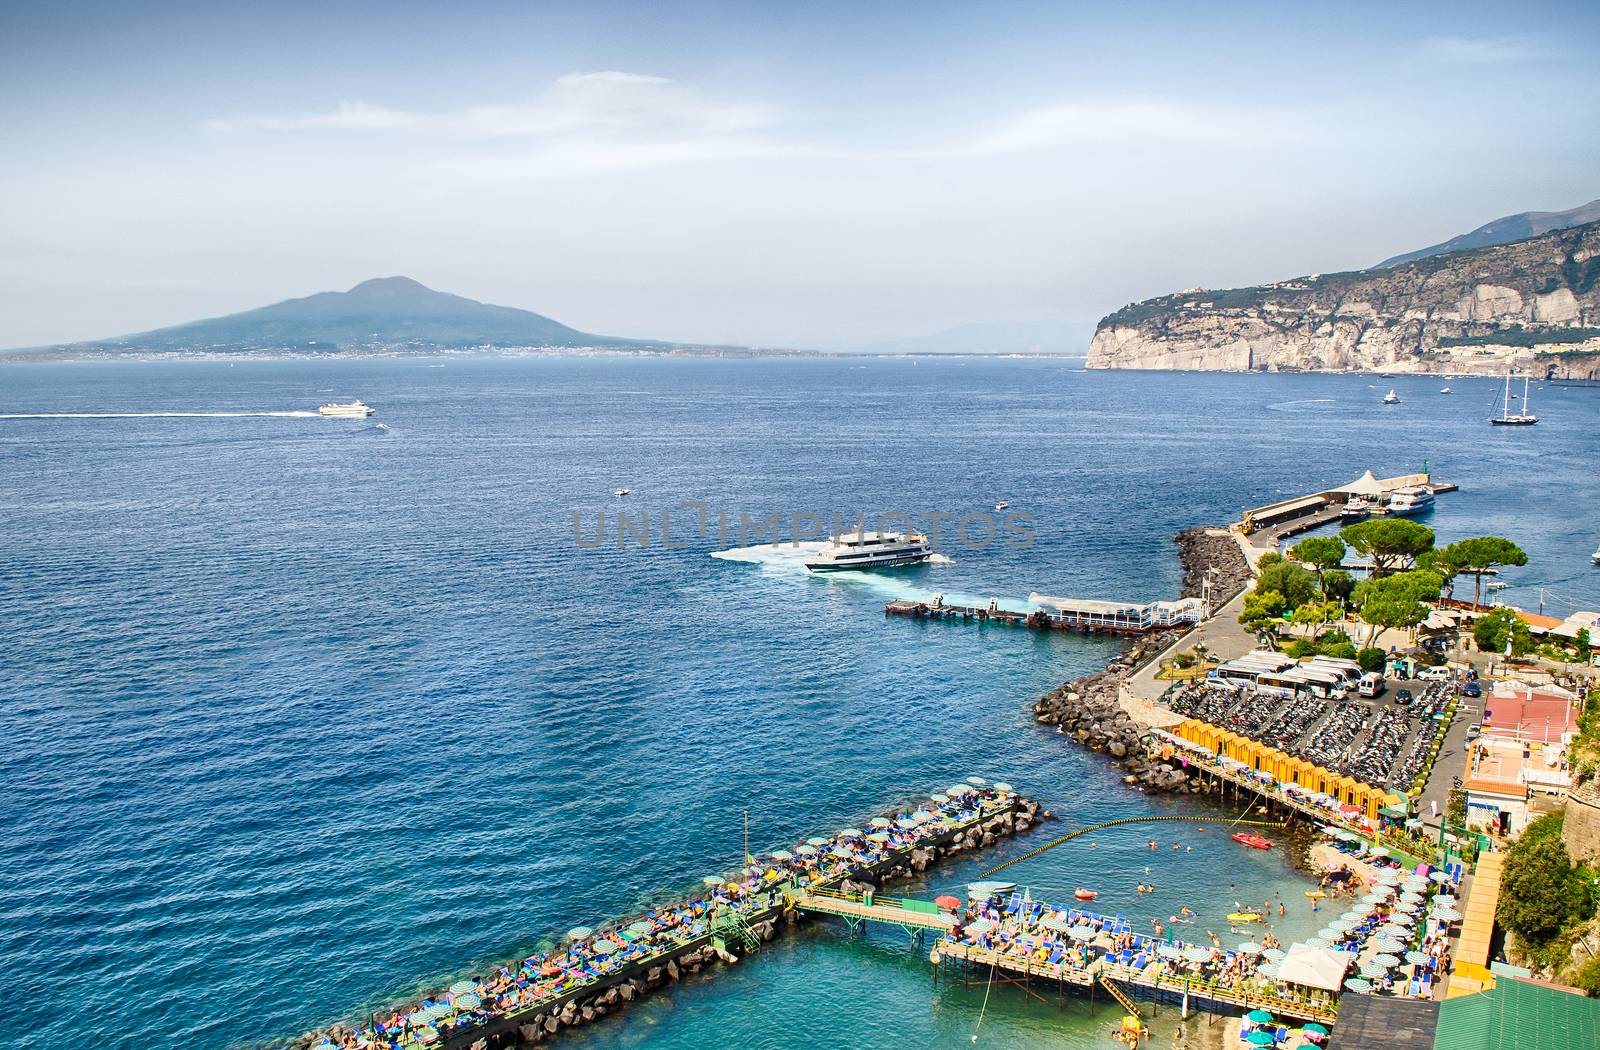 View of the Vesuvius and Sorrento Harbour, Italy